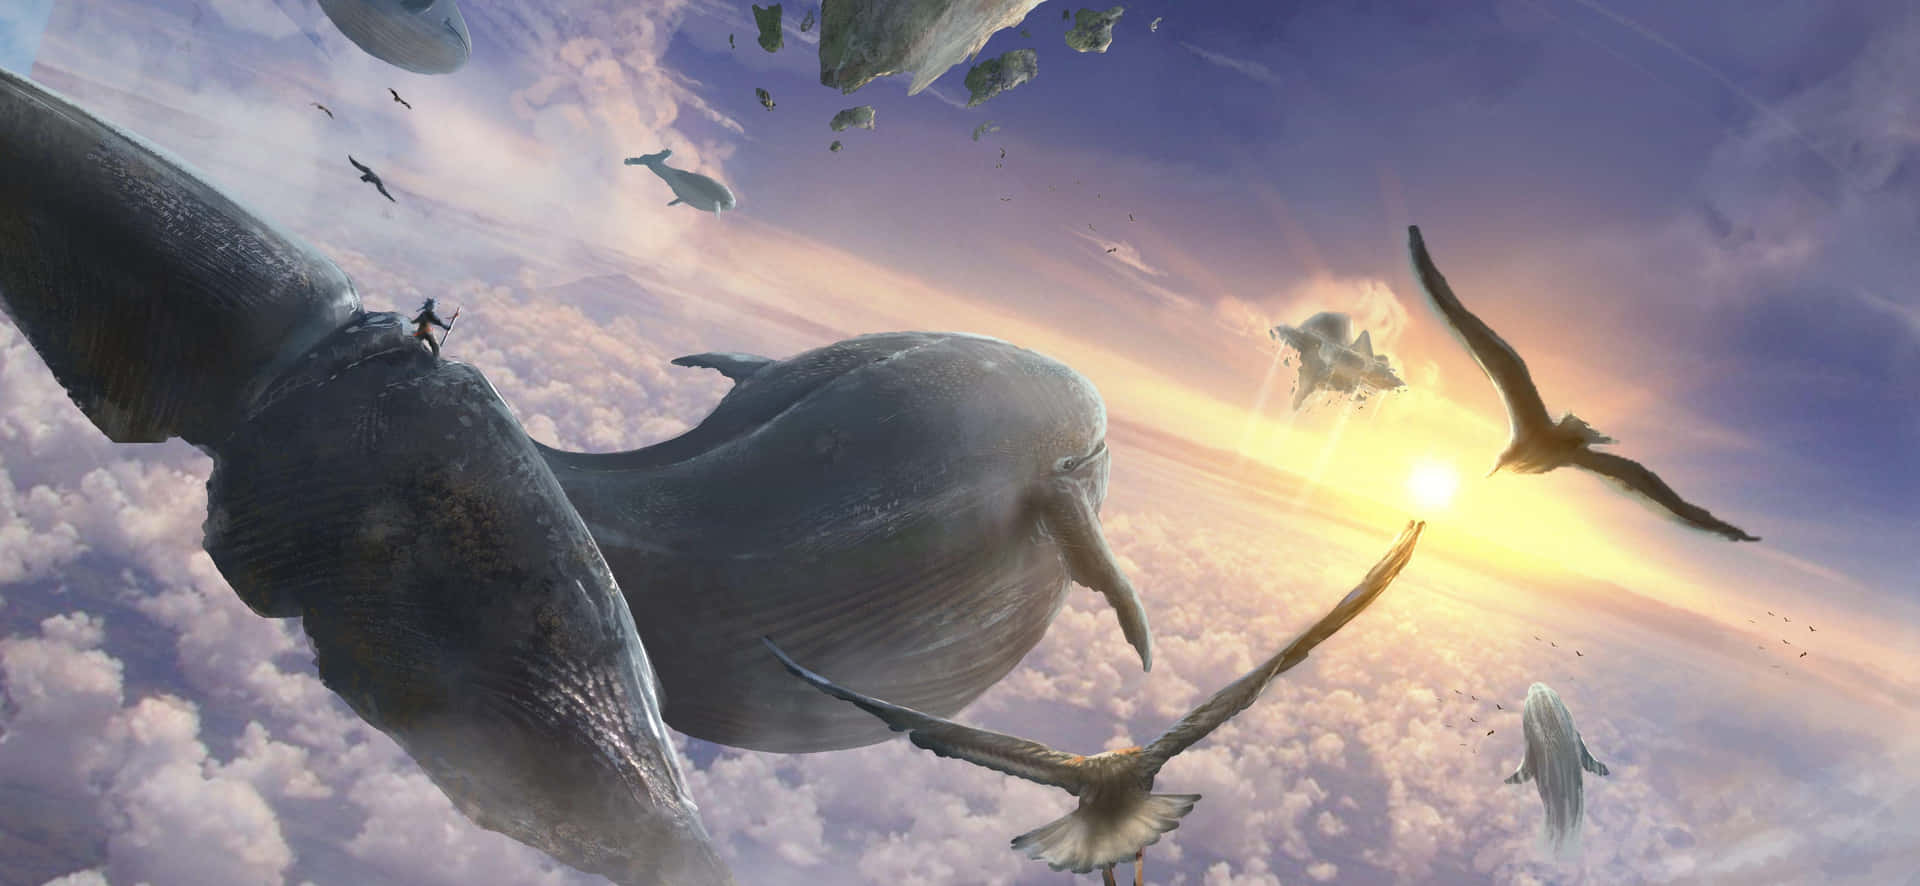 Whales_and_ Birds_ Surreal_ Sky Wallpaper